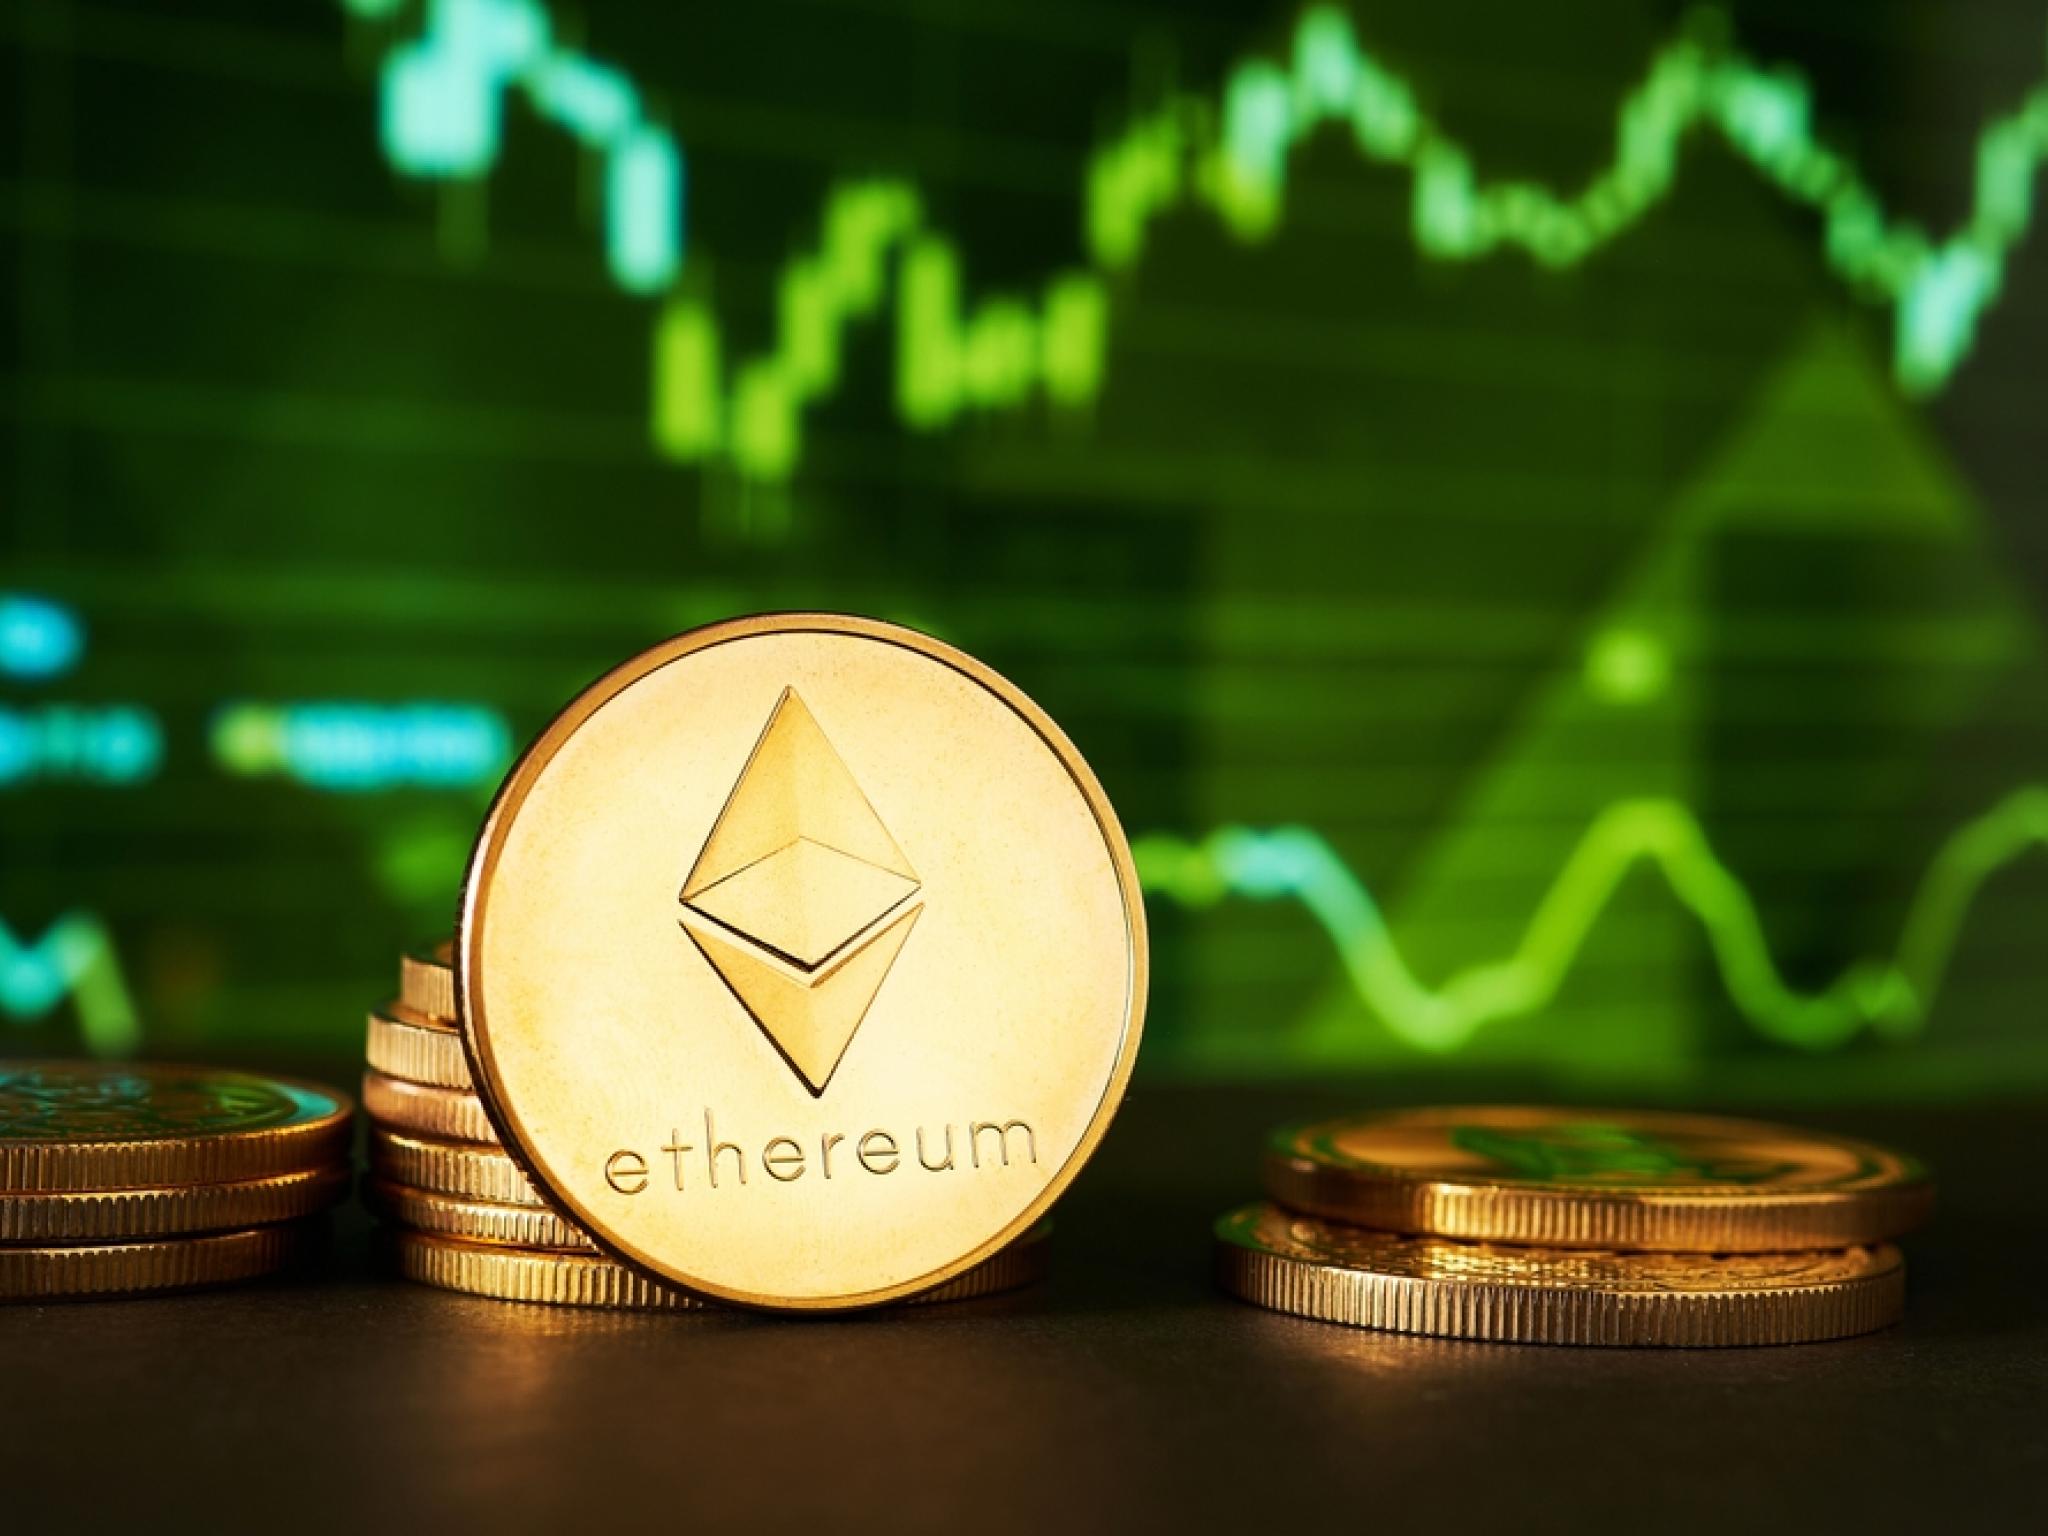  ethereum-falls-below-3000-following-jobless-claims-data-pendle-becomes-top-loser 